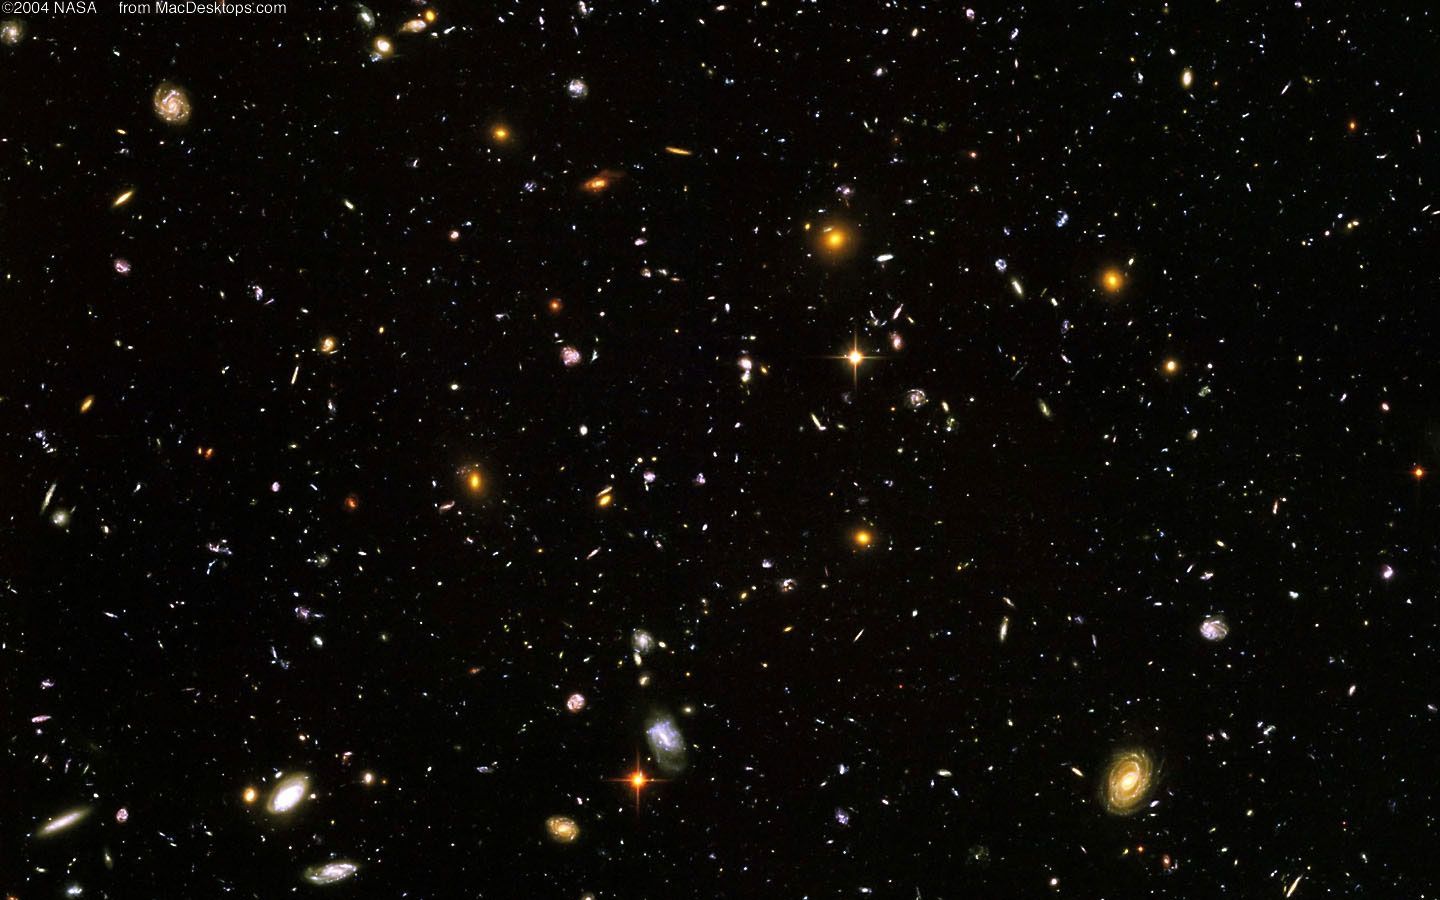 Hubble deep field image outer space wallpaper - High resolution